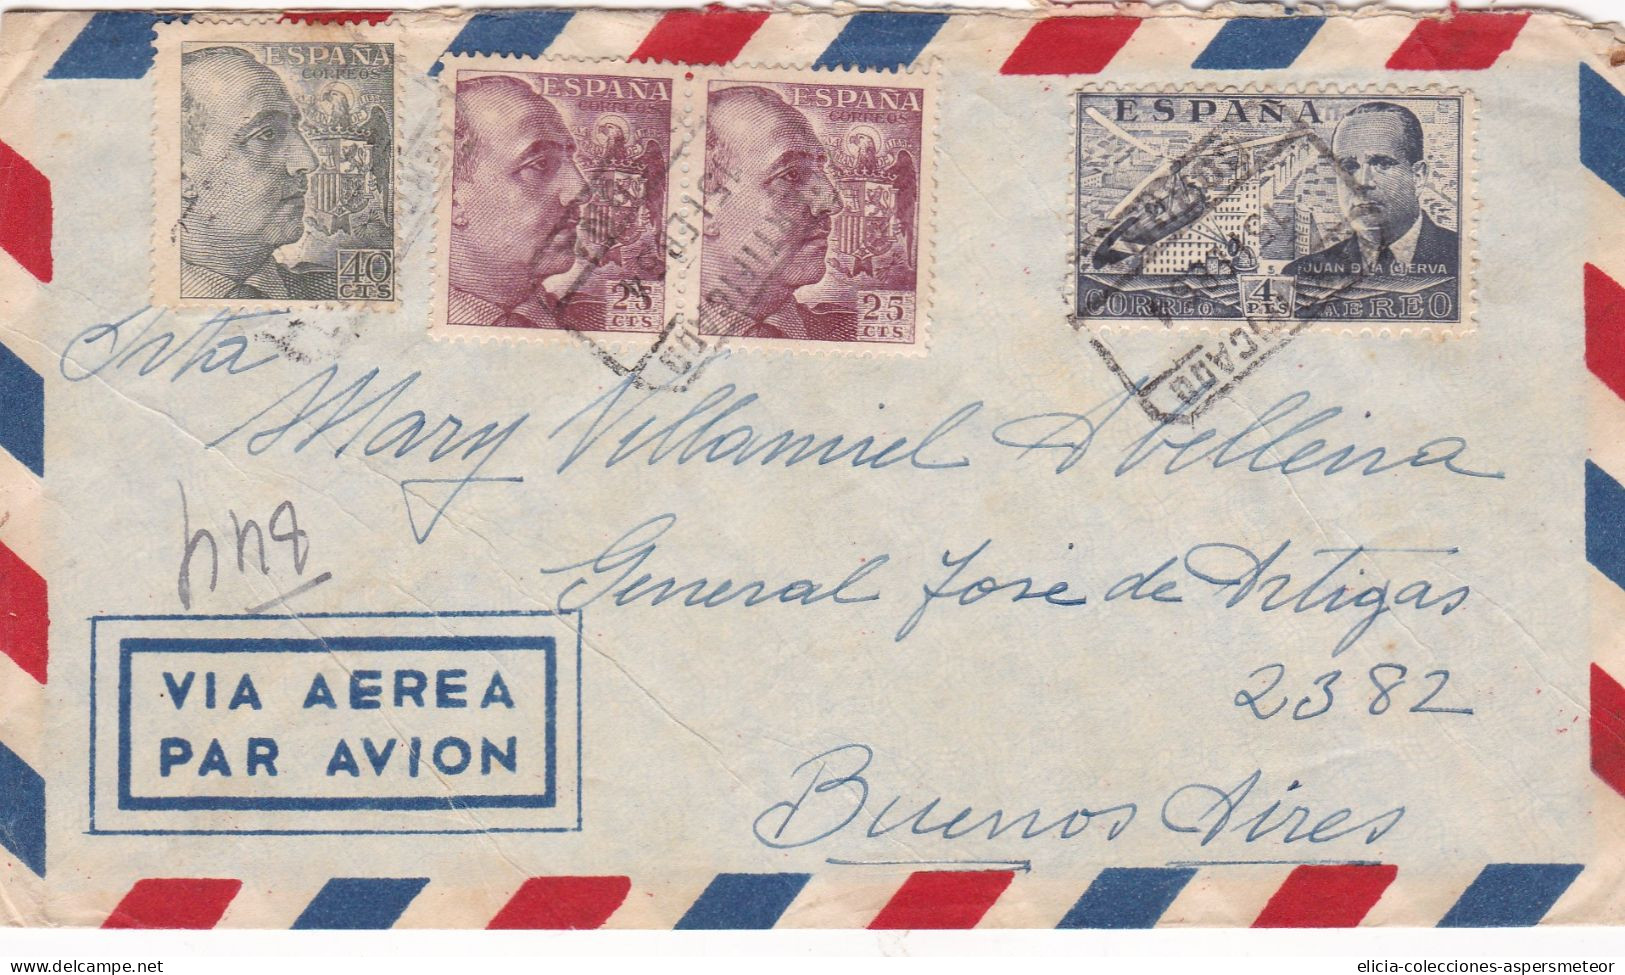 Spain - 1954 - Airmail - Letter - Sent From La Coruña To Buenos Aires, Argentina - Caja 30 - Storia Postale